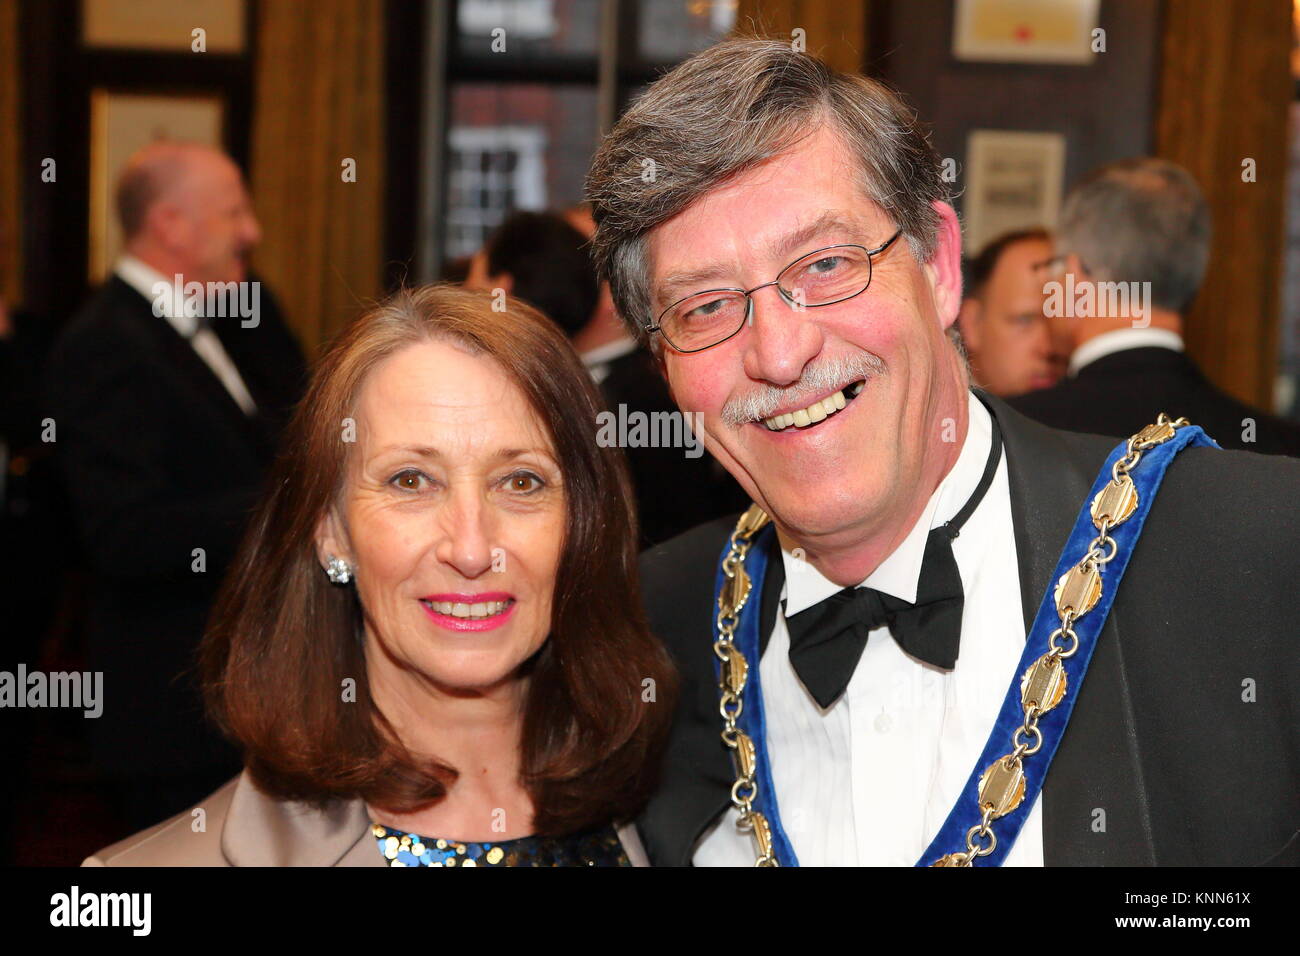 Henley Mayor Stefan Gawrysiak at the Henley Rugby Club Dinner 2014 in the town hall at Henley-on-Thames, Oxfordshire, UK Stock Photo